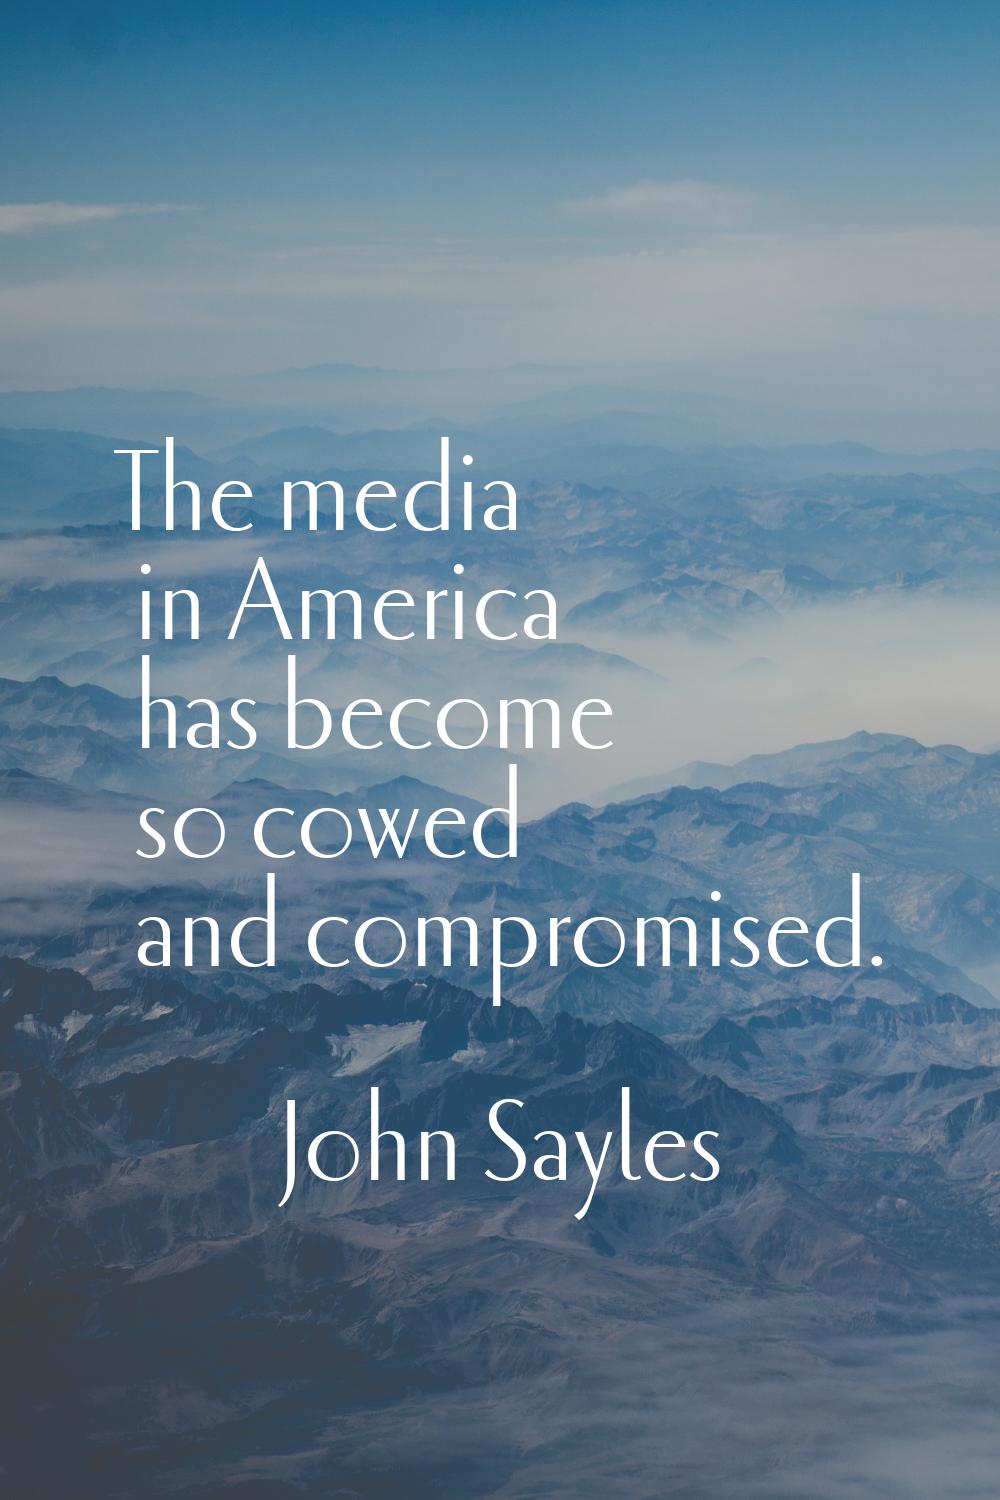 The media in America has become so cowed and compromised.